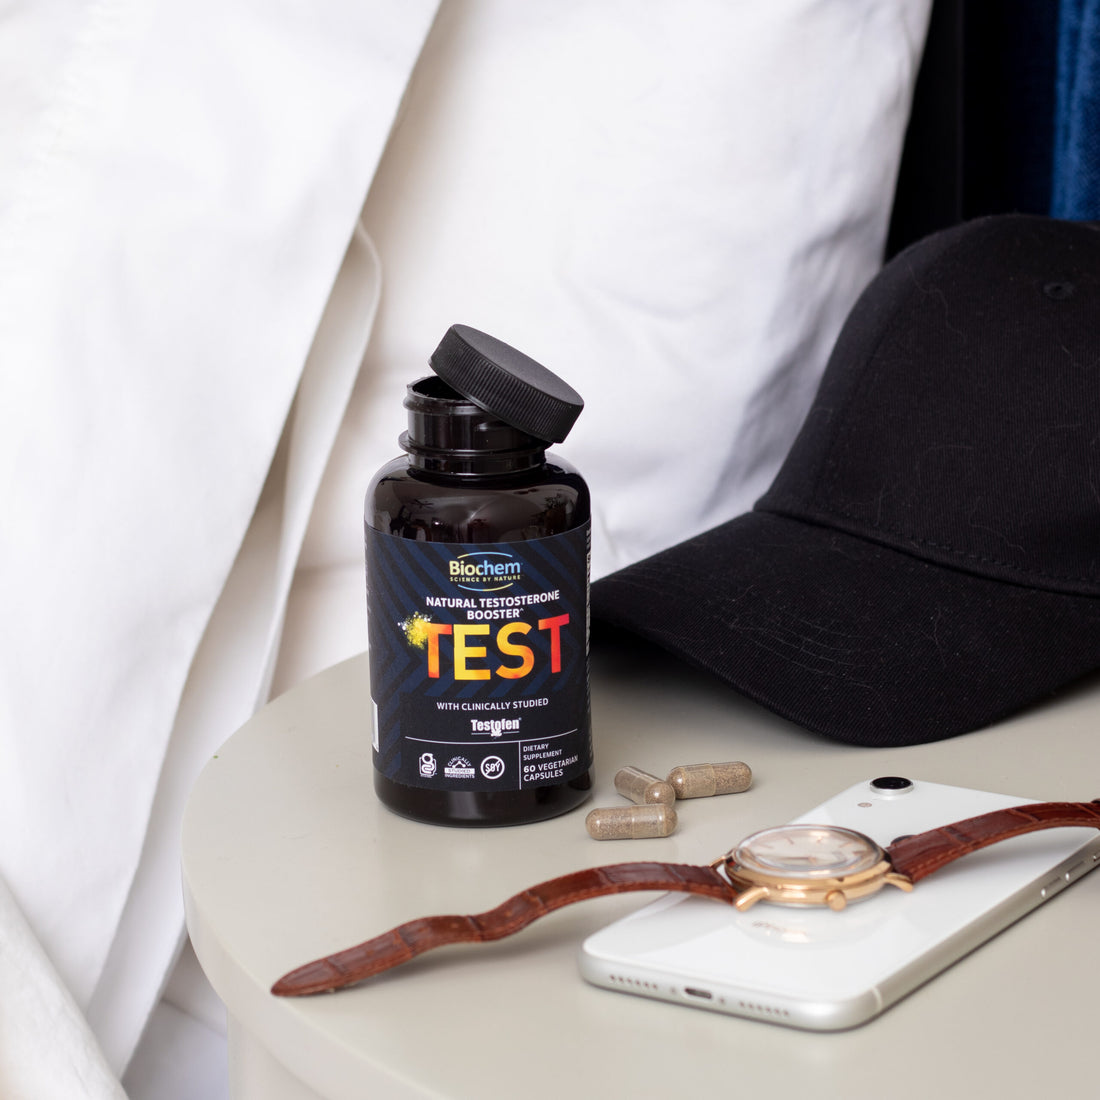 What Do You Know About Testosterone - TEST